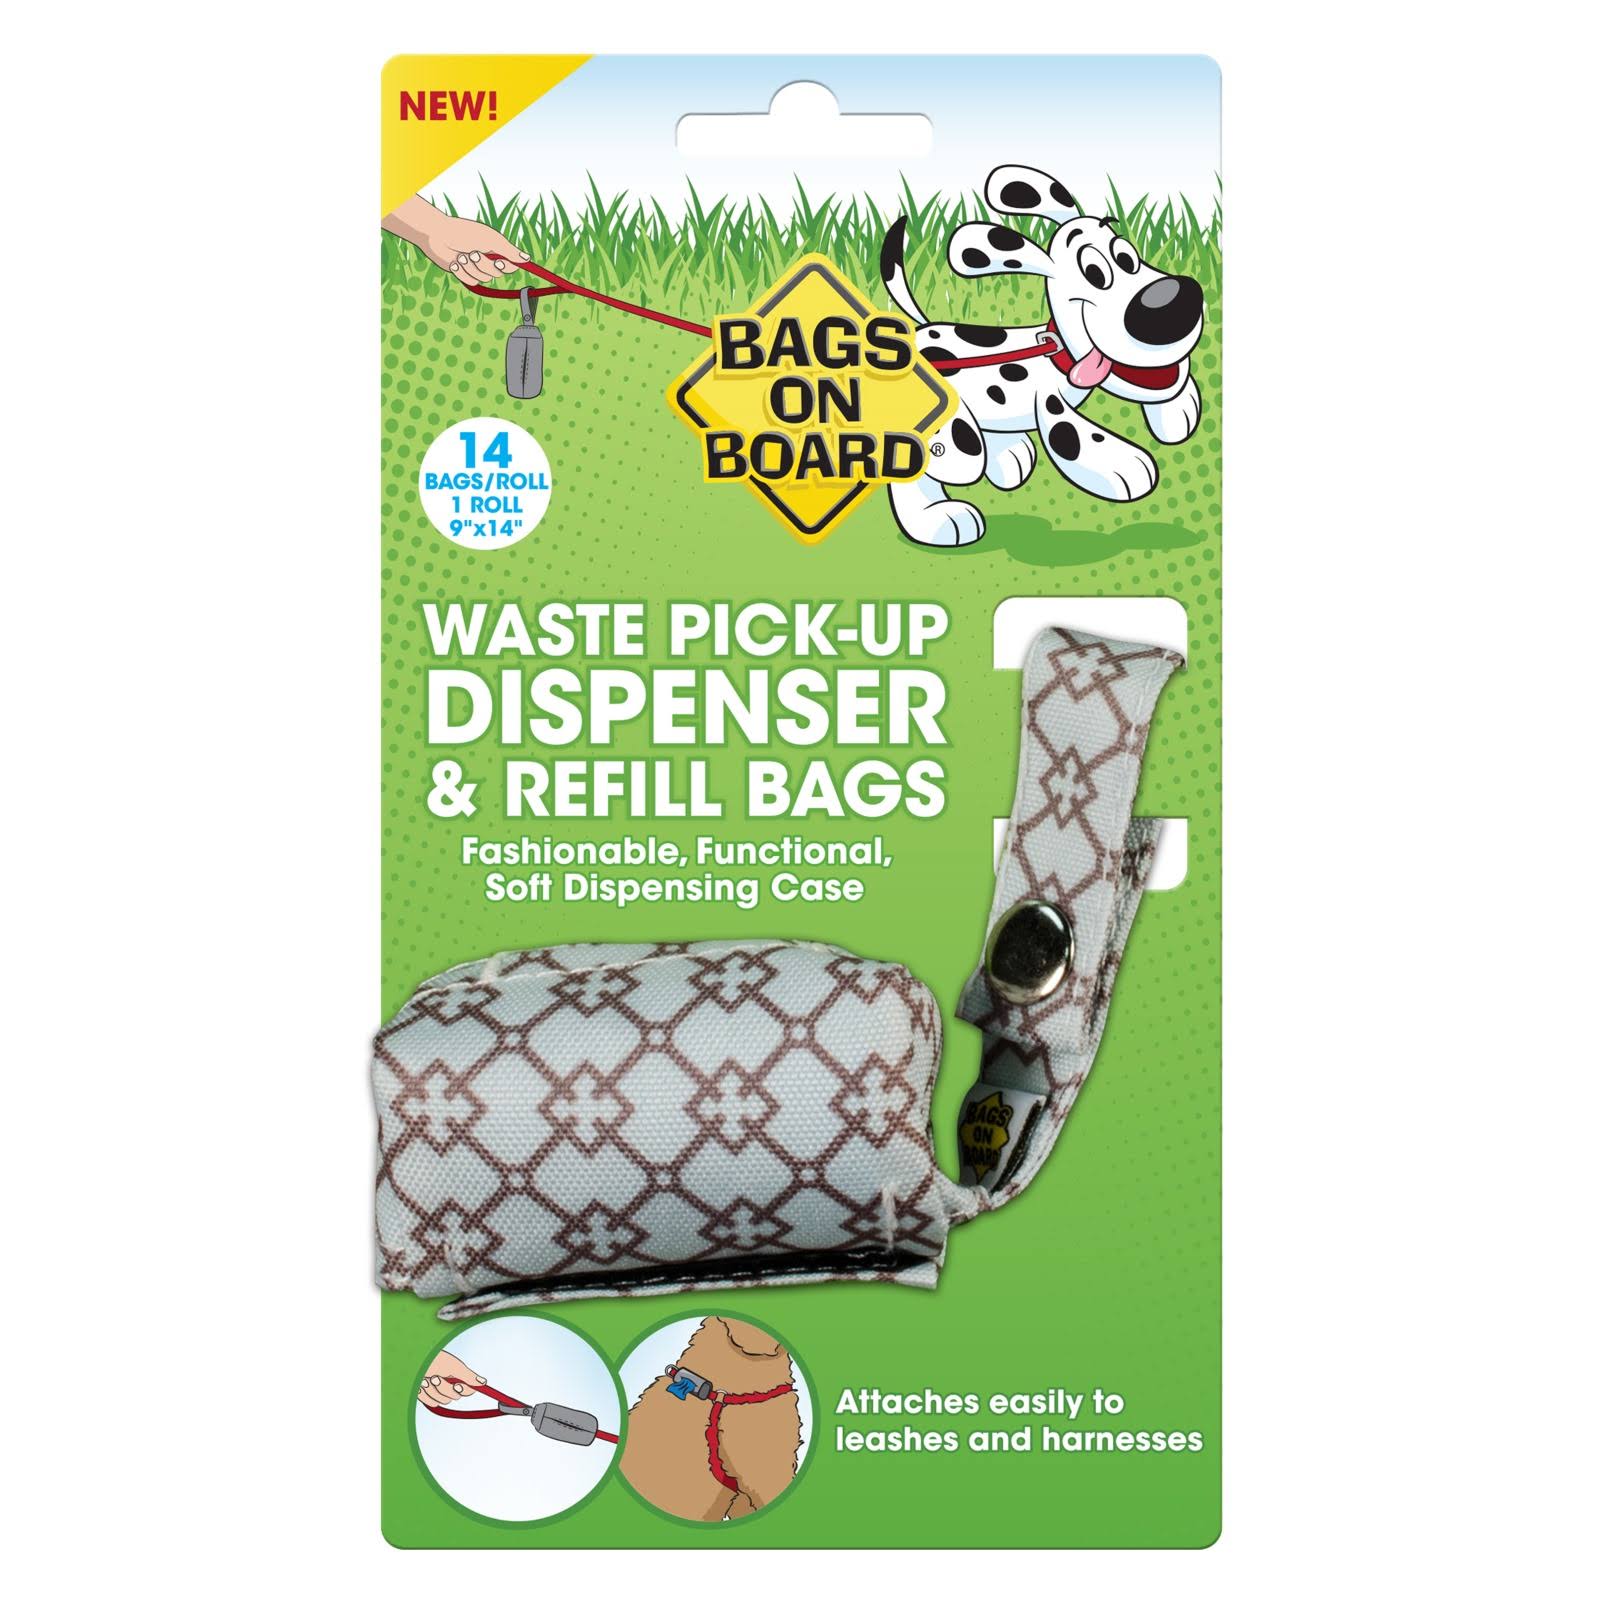 Bags On Board Waste Pick-Up Dispenser & Refill Bags